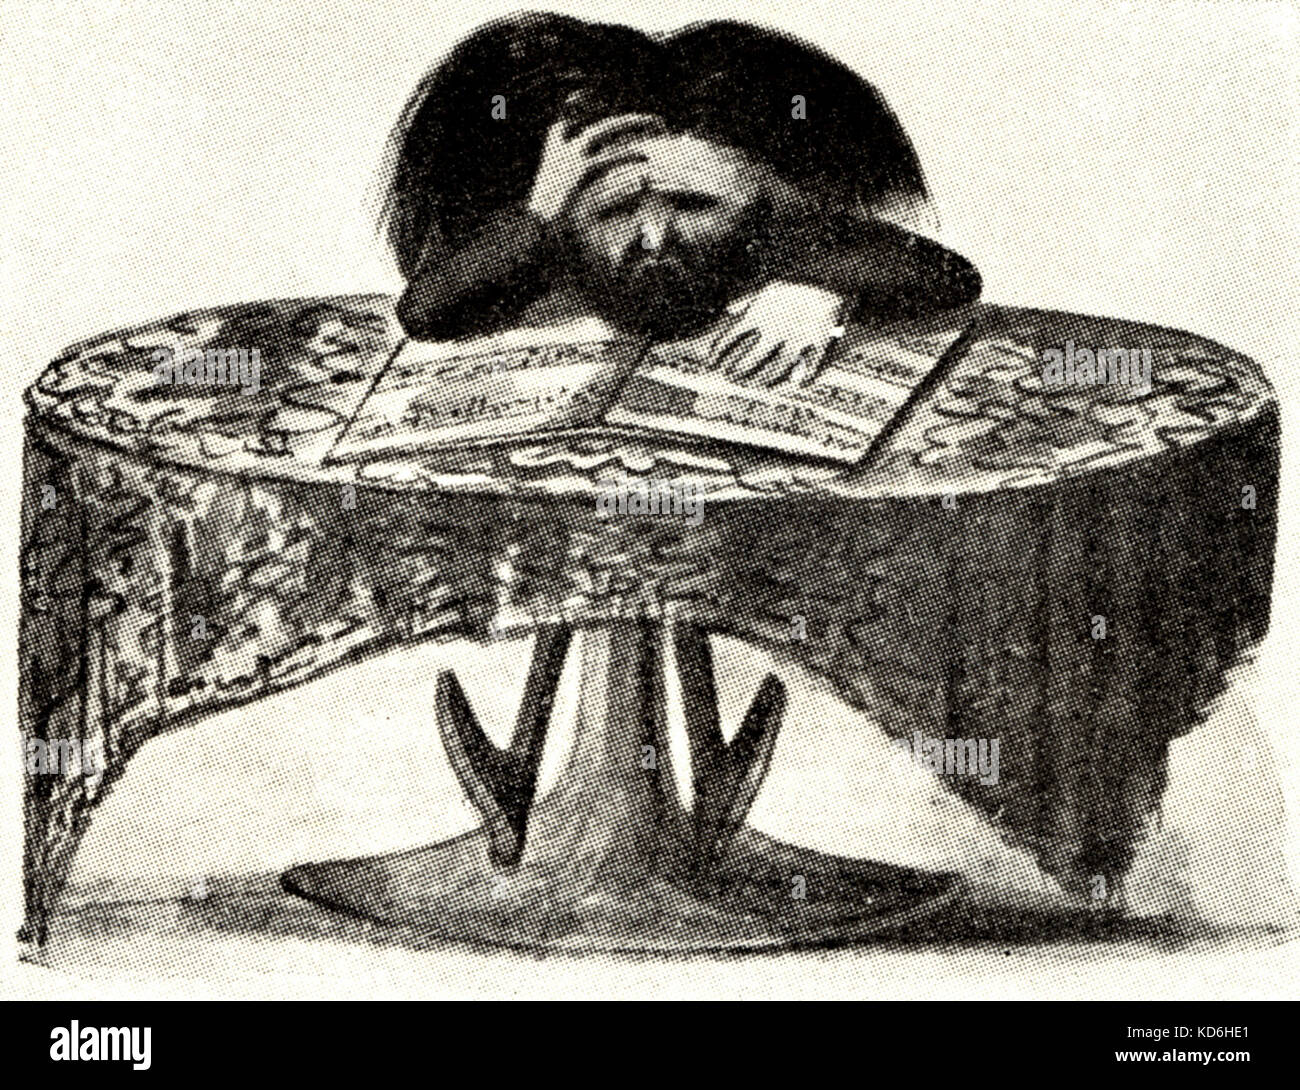 Verdi caricatured at a table, drooping on score with his hand holding his forehead. Caricature by Delfico.  Caption reads: 'Lo spartito di un seccatore'.  Literally: 'The score of a bore'.  Verdi is painfully reading some  composition given to him for judgement.     Italian composer (1813-1901). Stock Photo